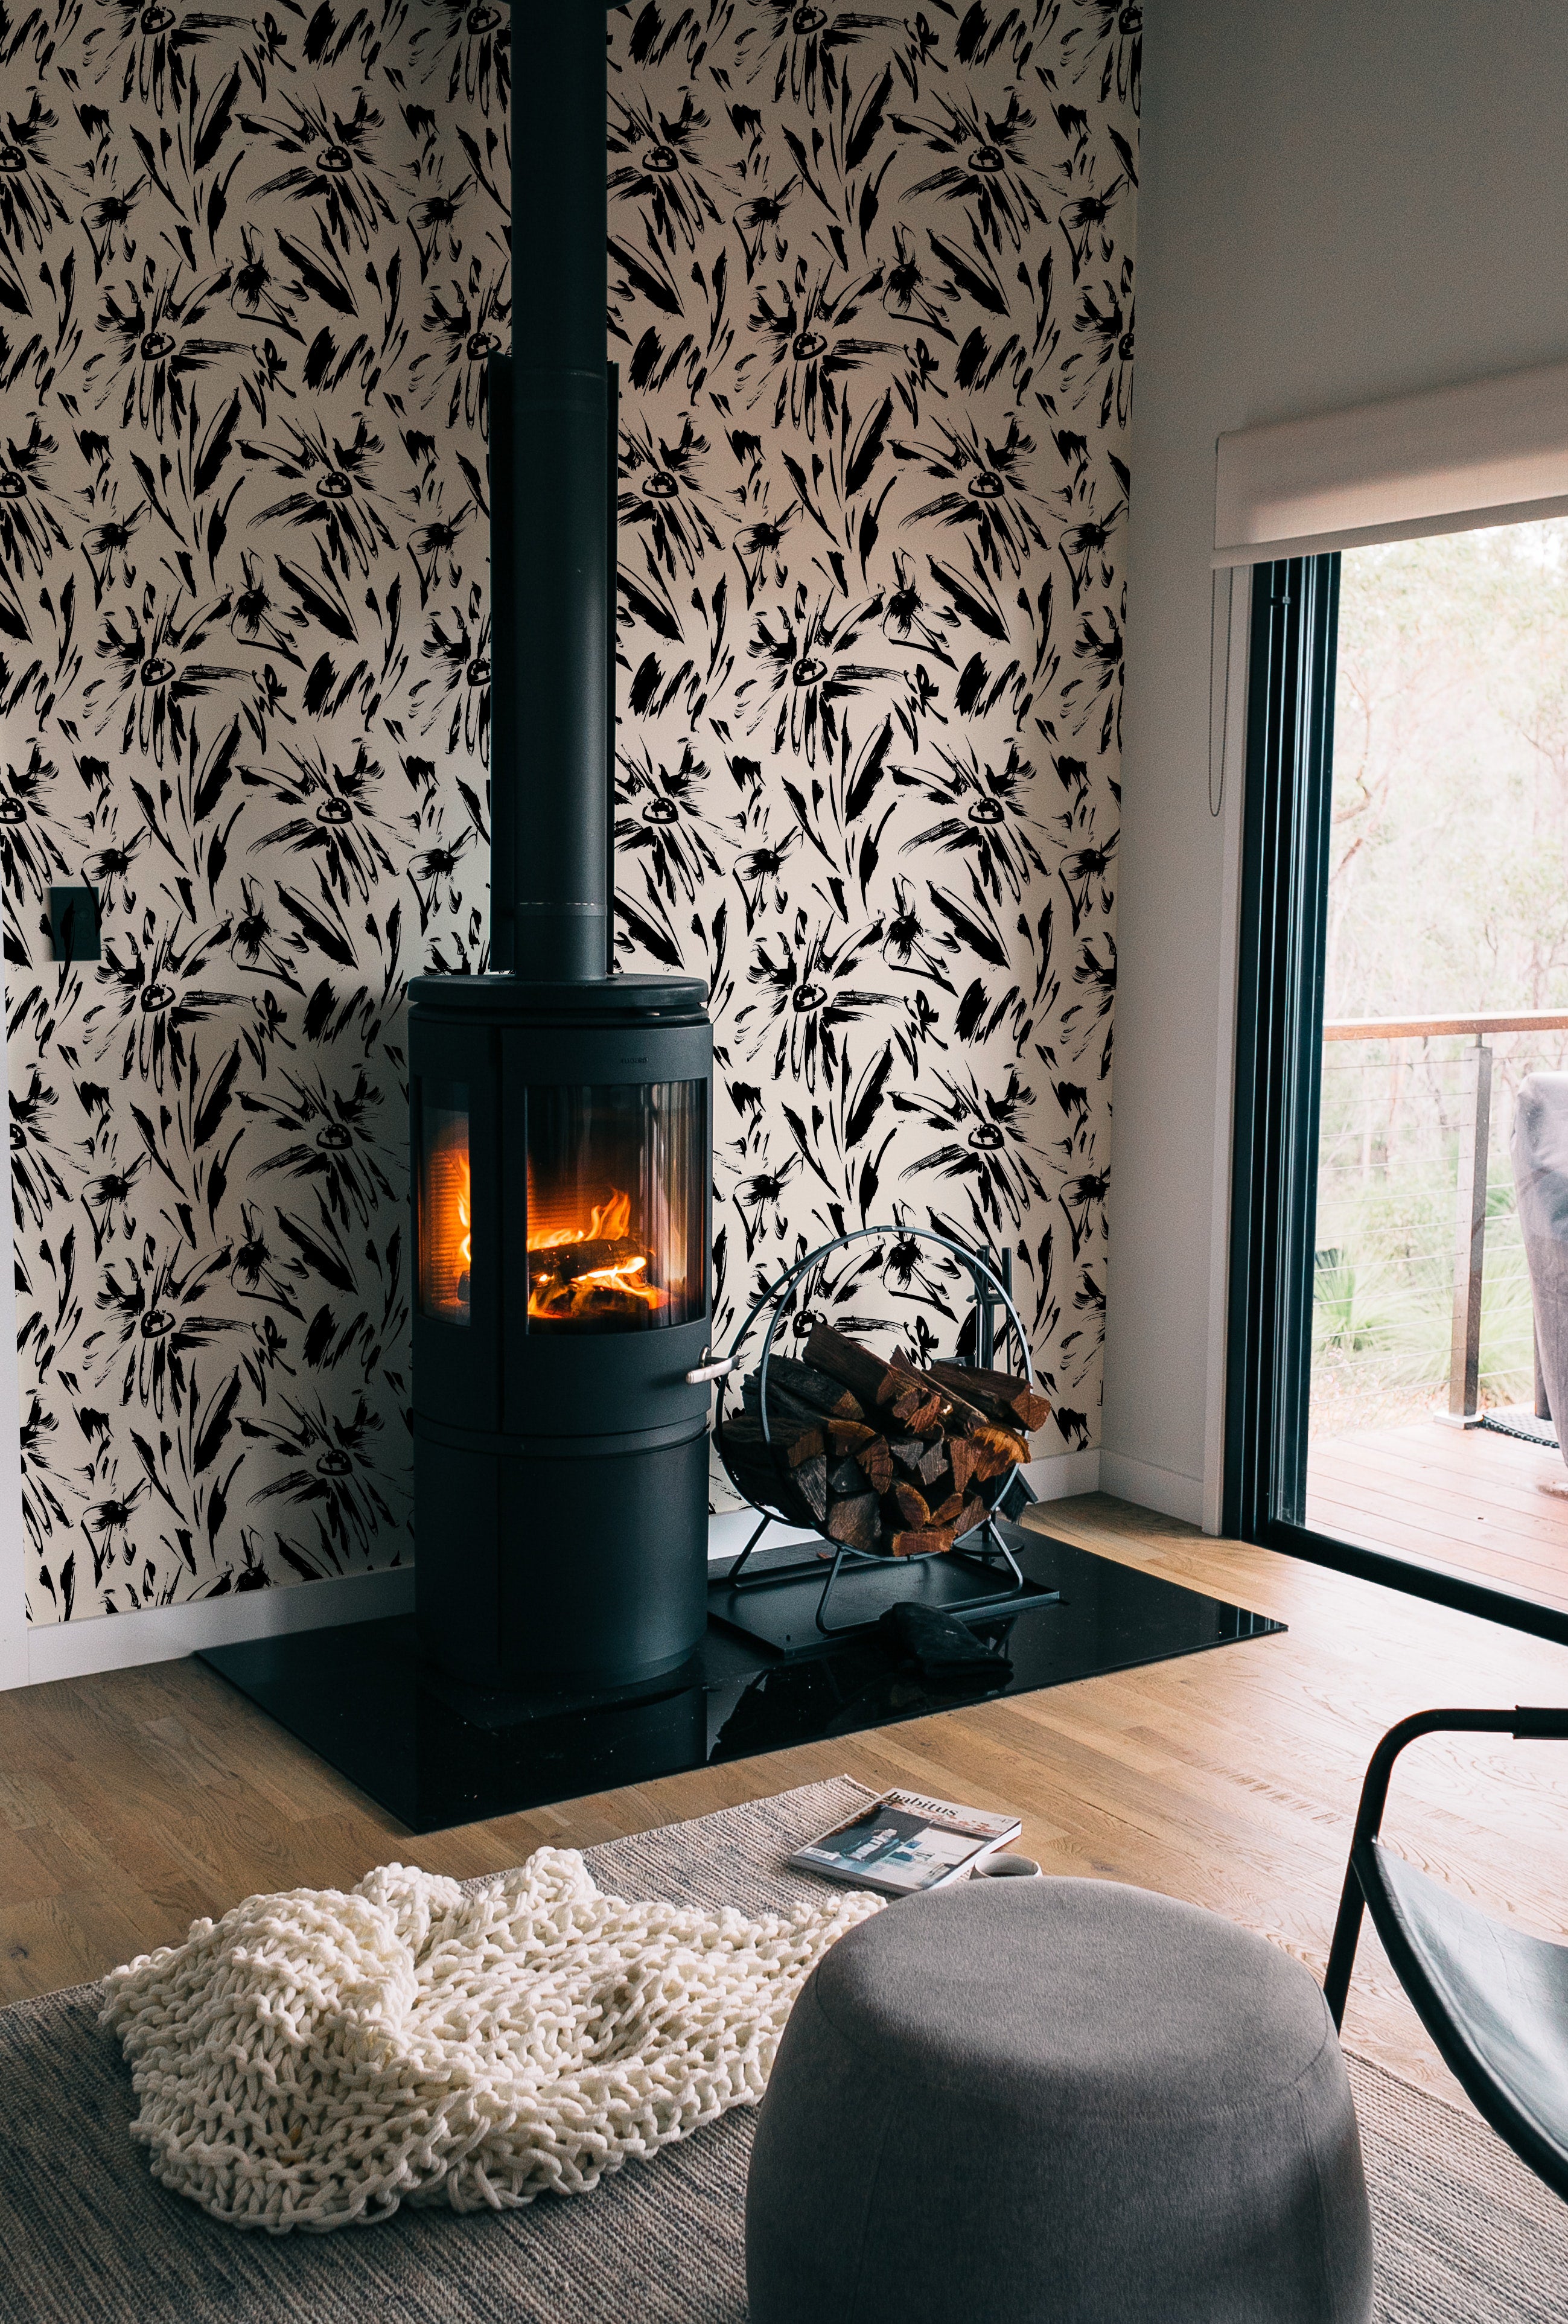 A cozy living room corner enhanced by the Modern Floral Sketch Wallpaper - 25", with black abstract floral patterns on a white background. The wallpaper surrounds a modern, freestanding fireplace, adding a dramatic and stylish element to the warm and inviting room